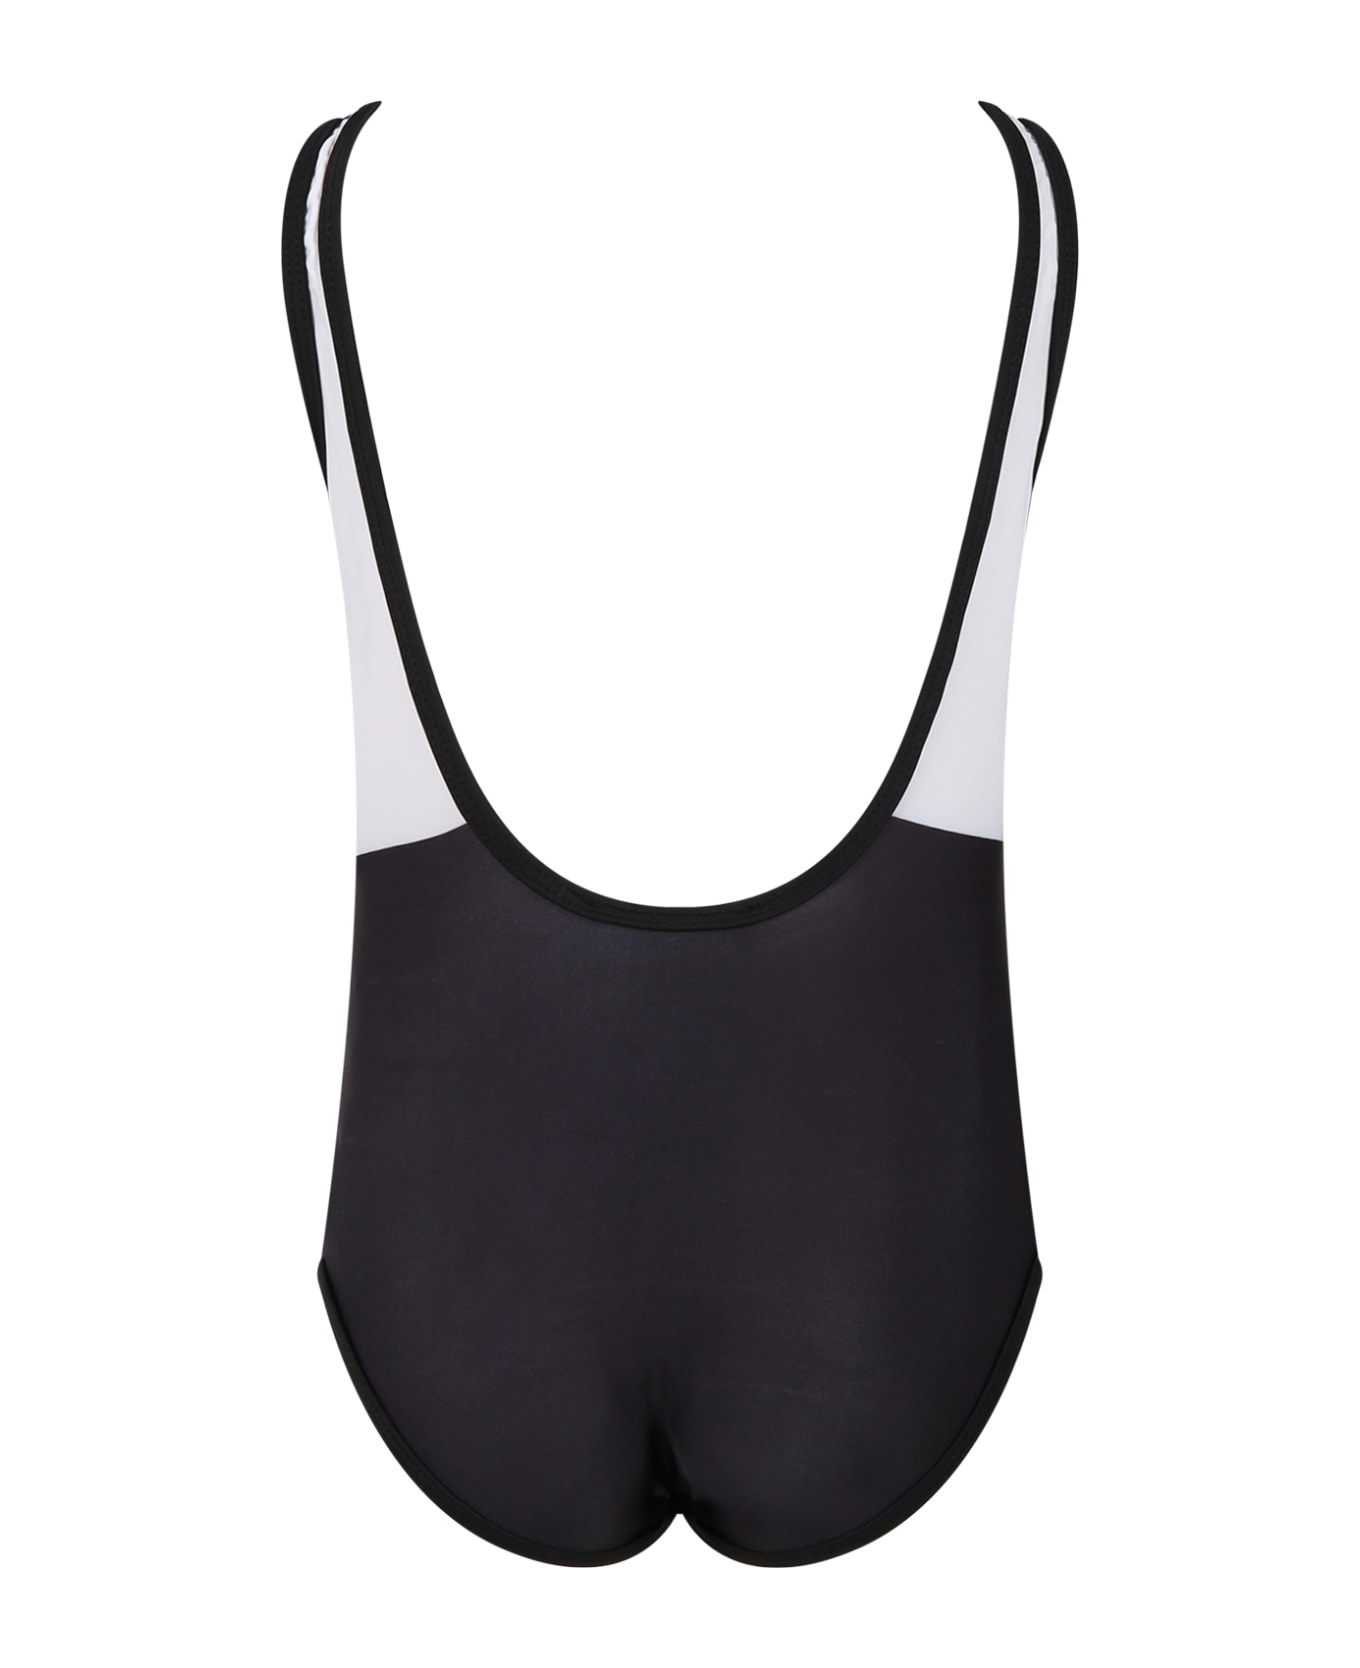 DKNY Multicolor Swimsuit For Girl With Logo - Multicolor